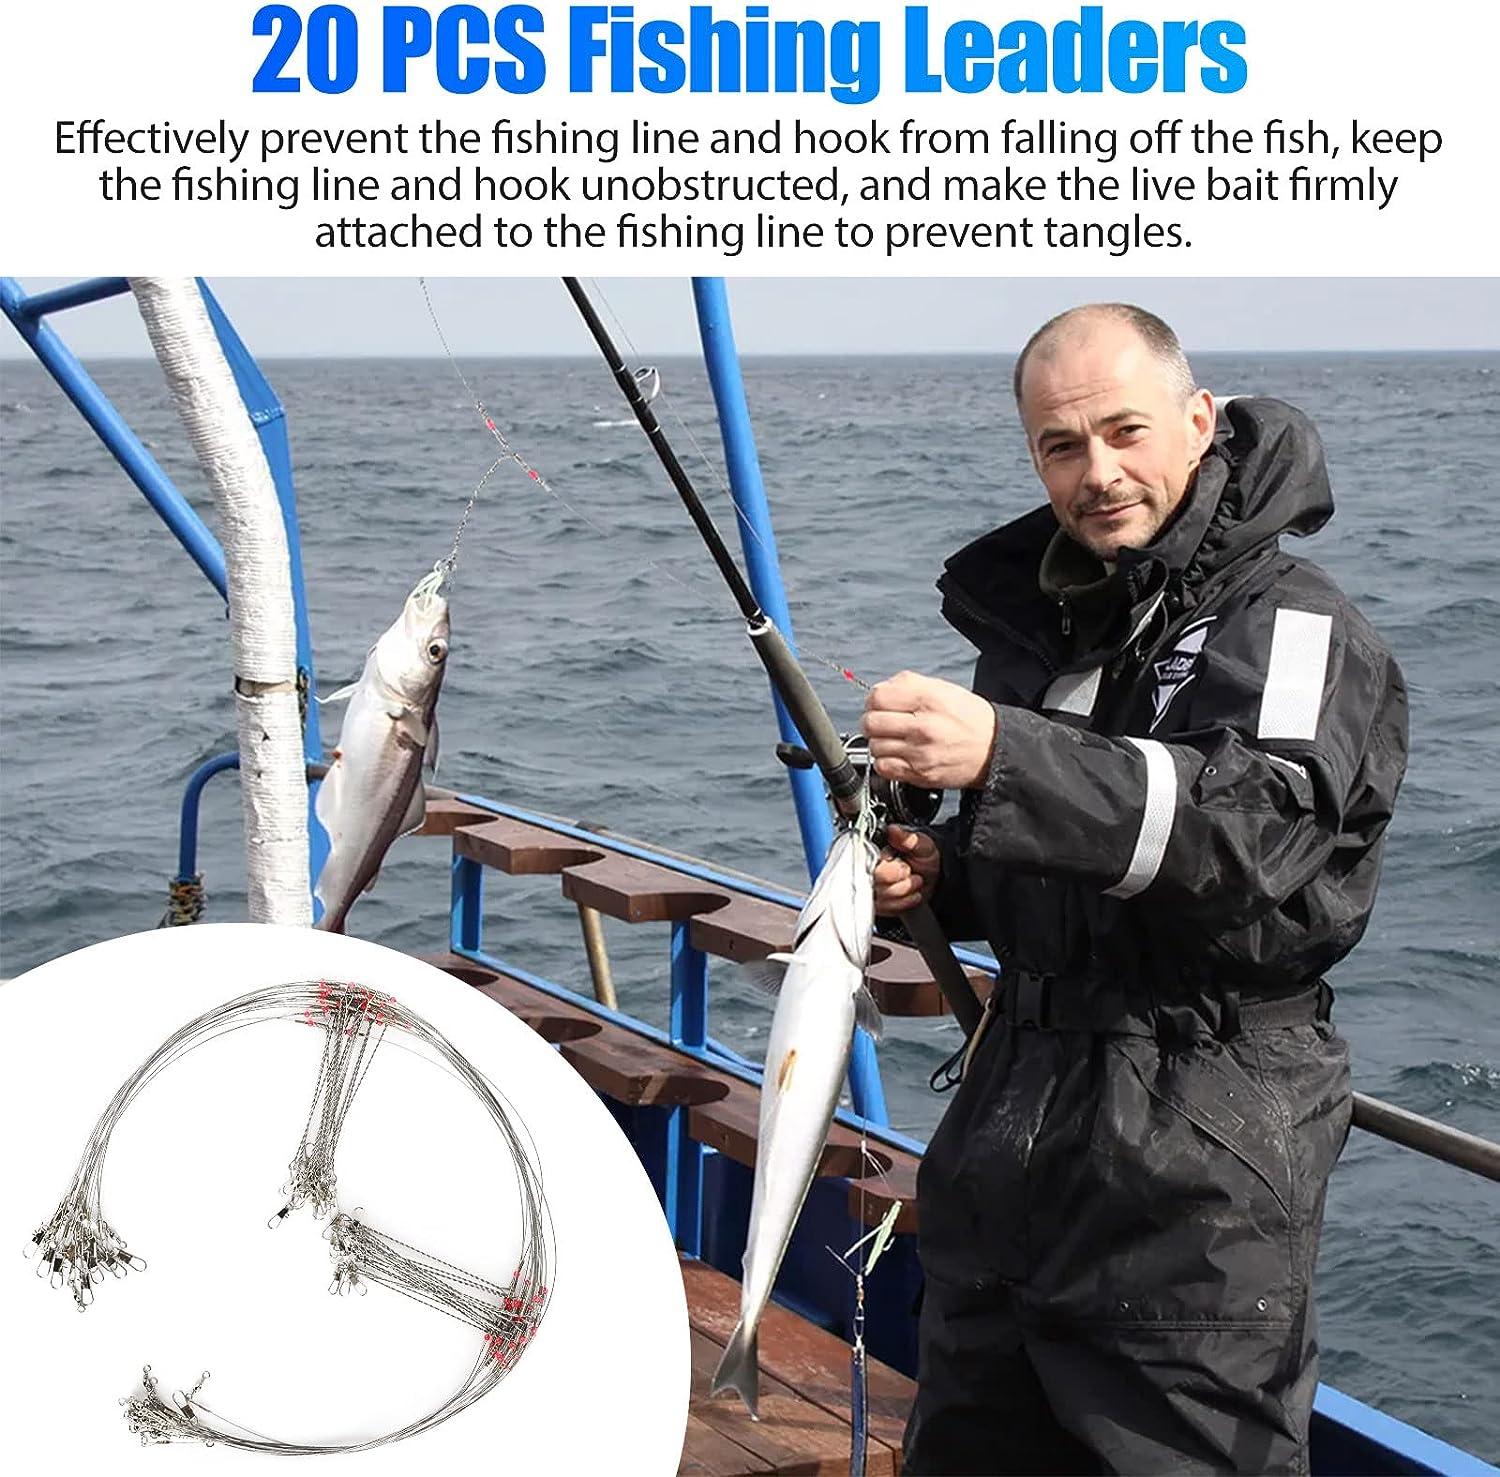 TSV 20 PCS Fishing Leaders Tackle Rigs, High-Strength Fishing Wire